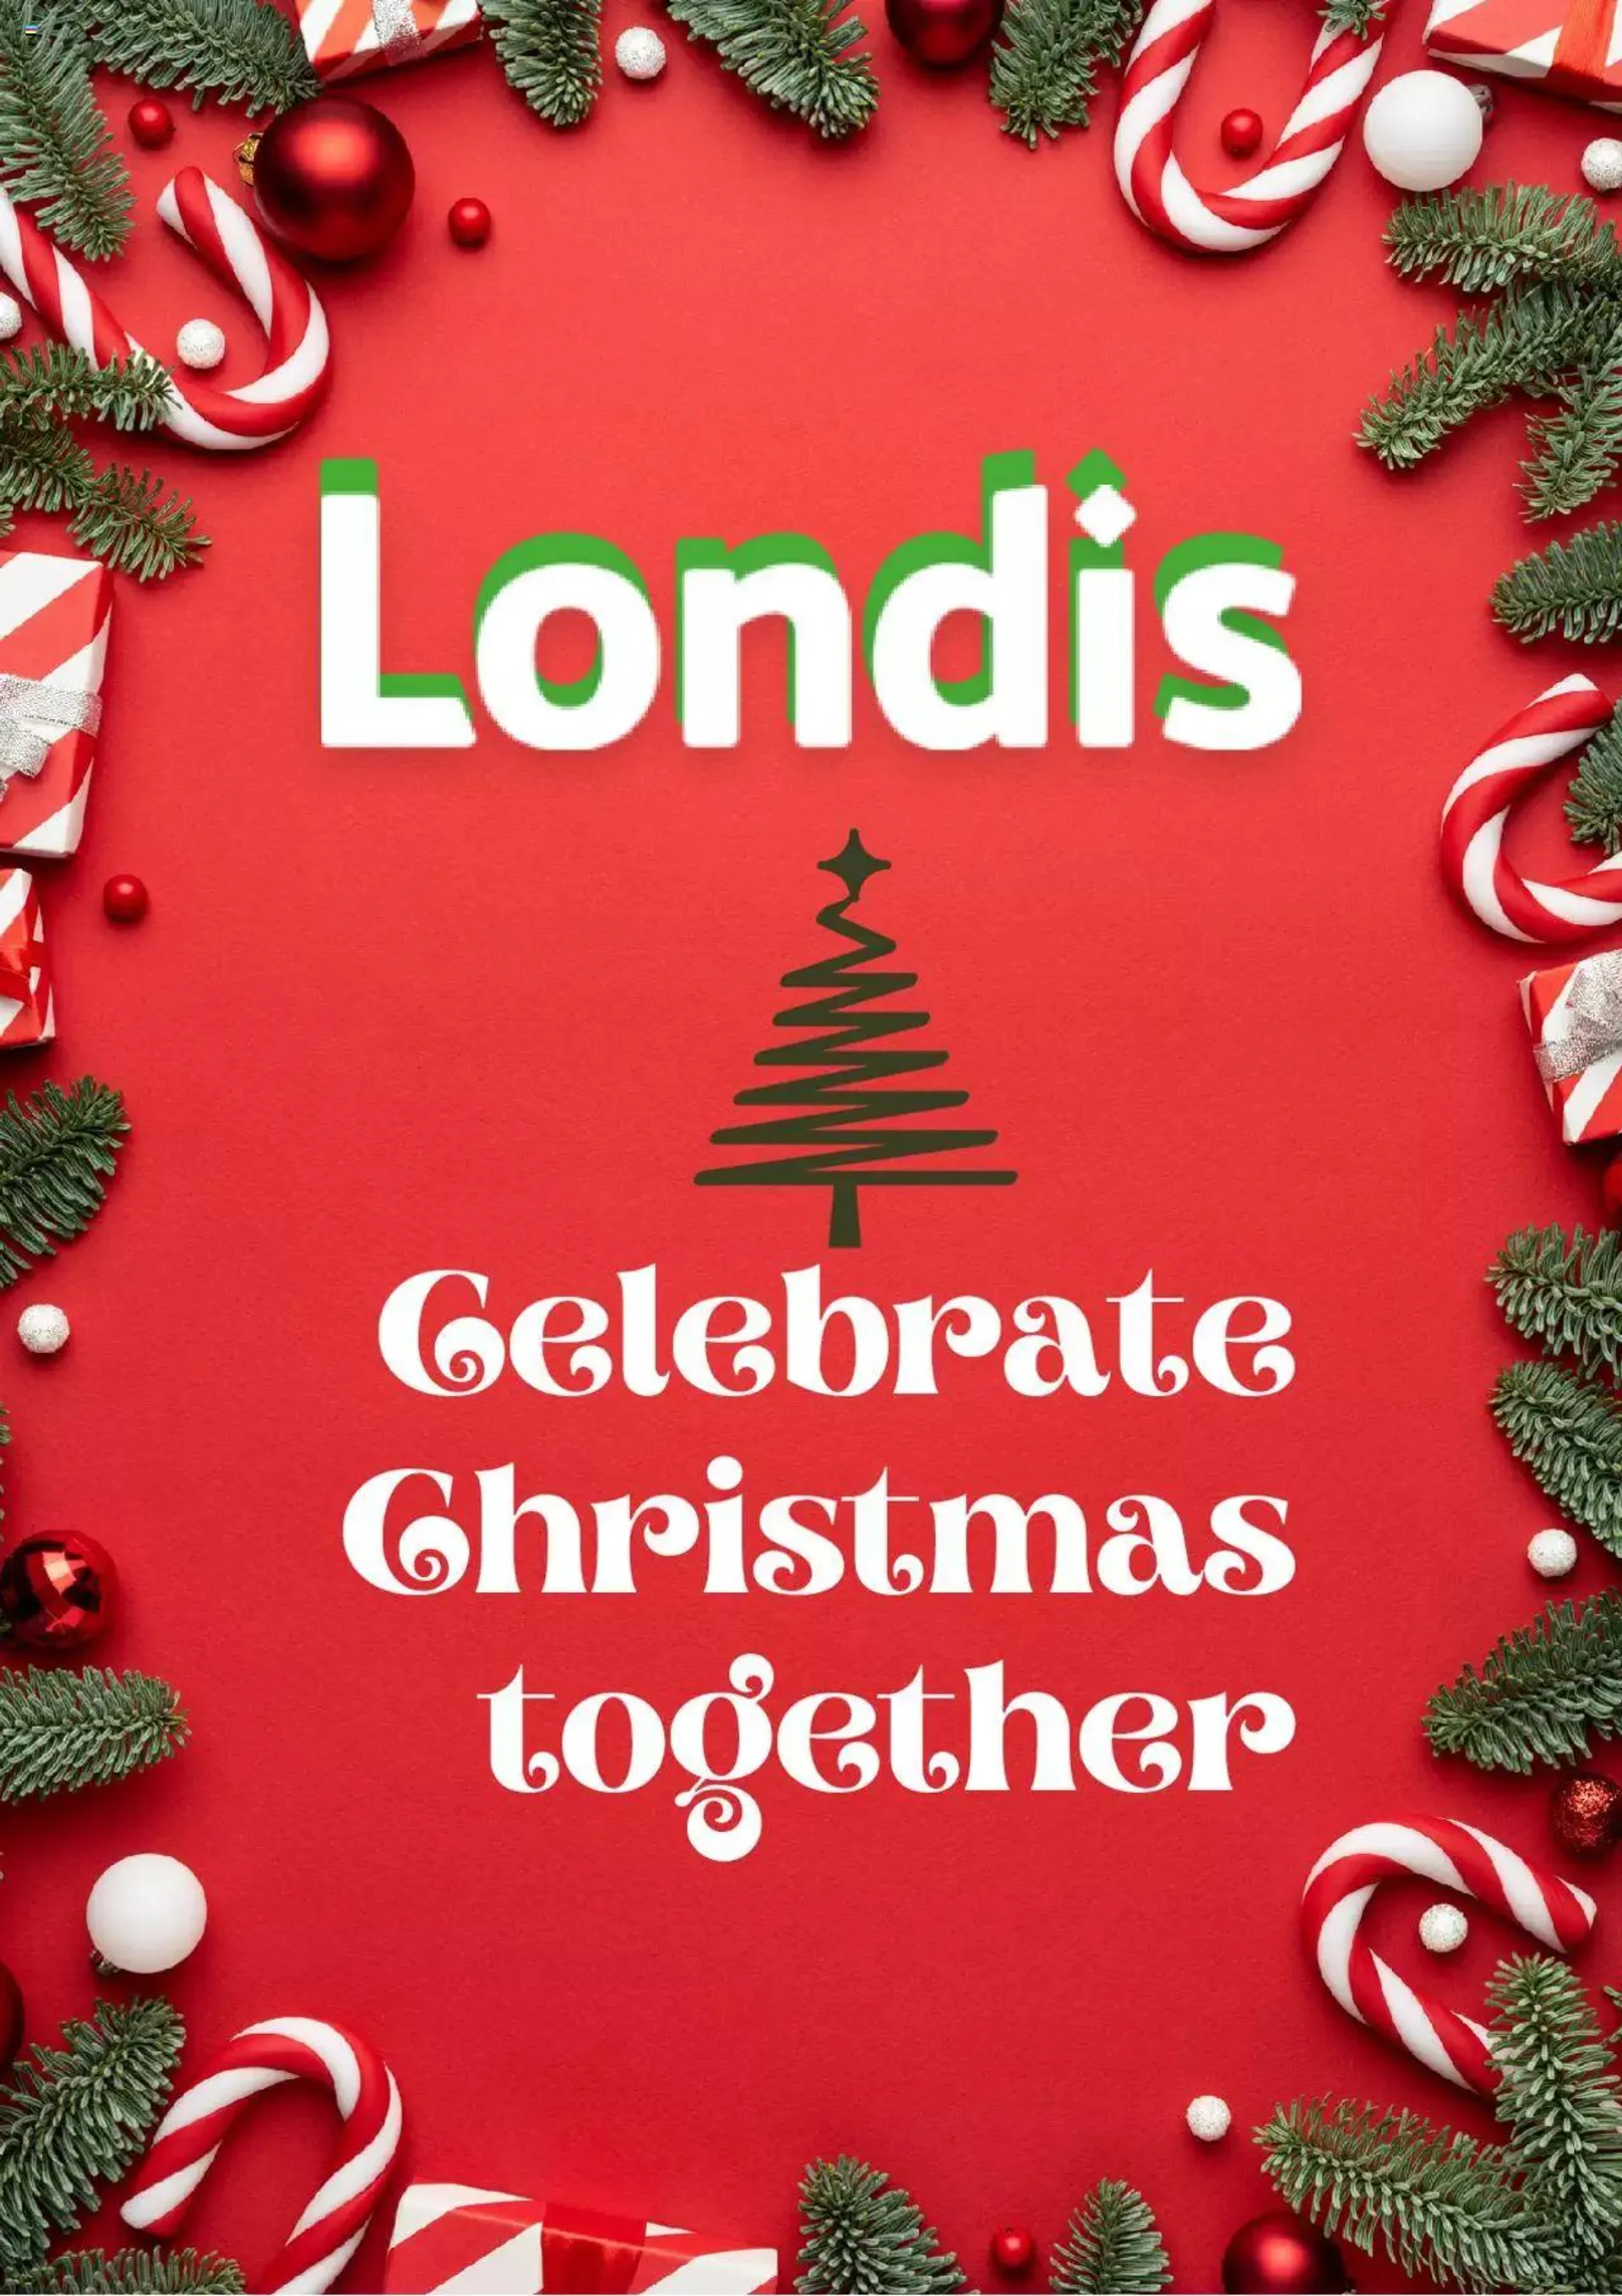 Londis - Christmas Offers - 0